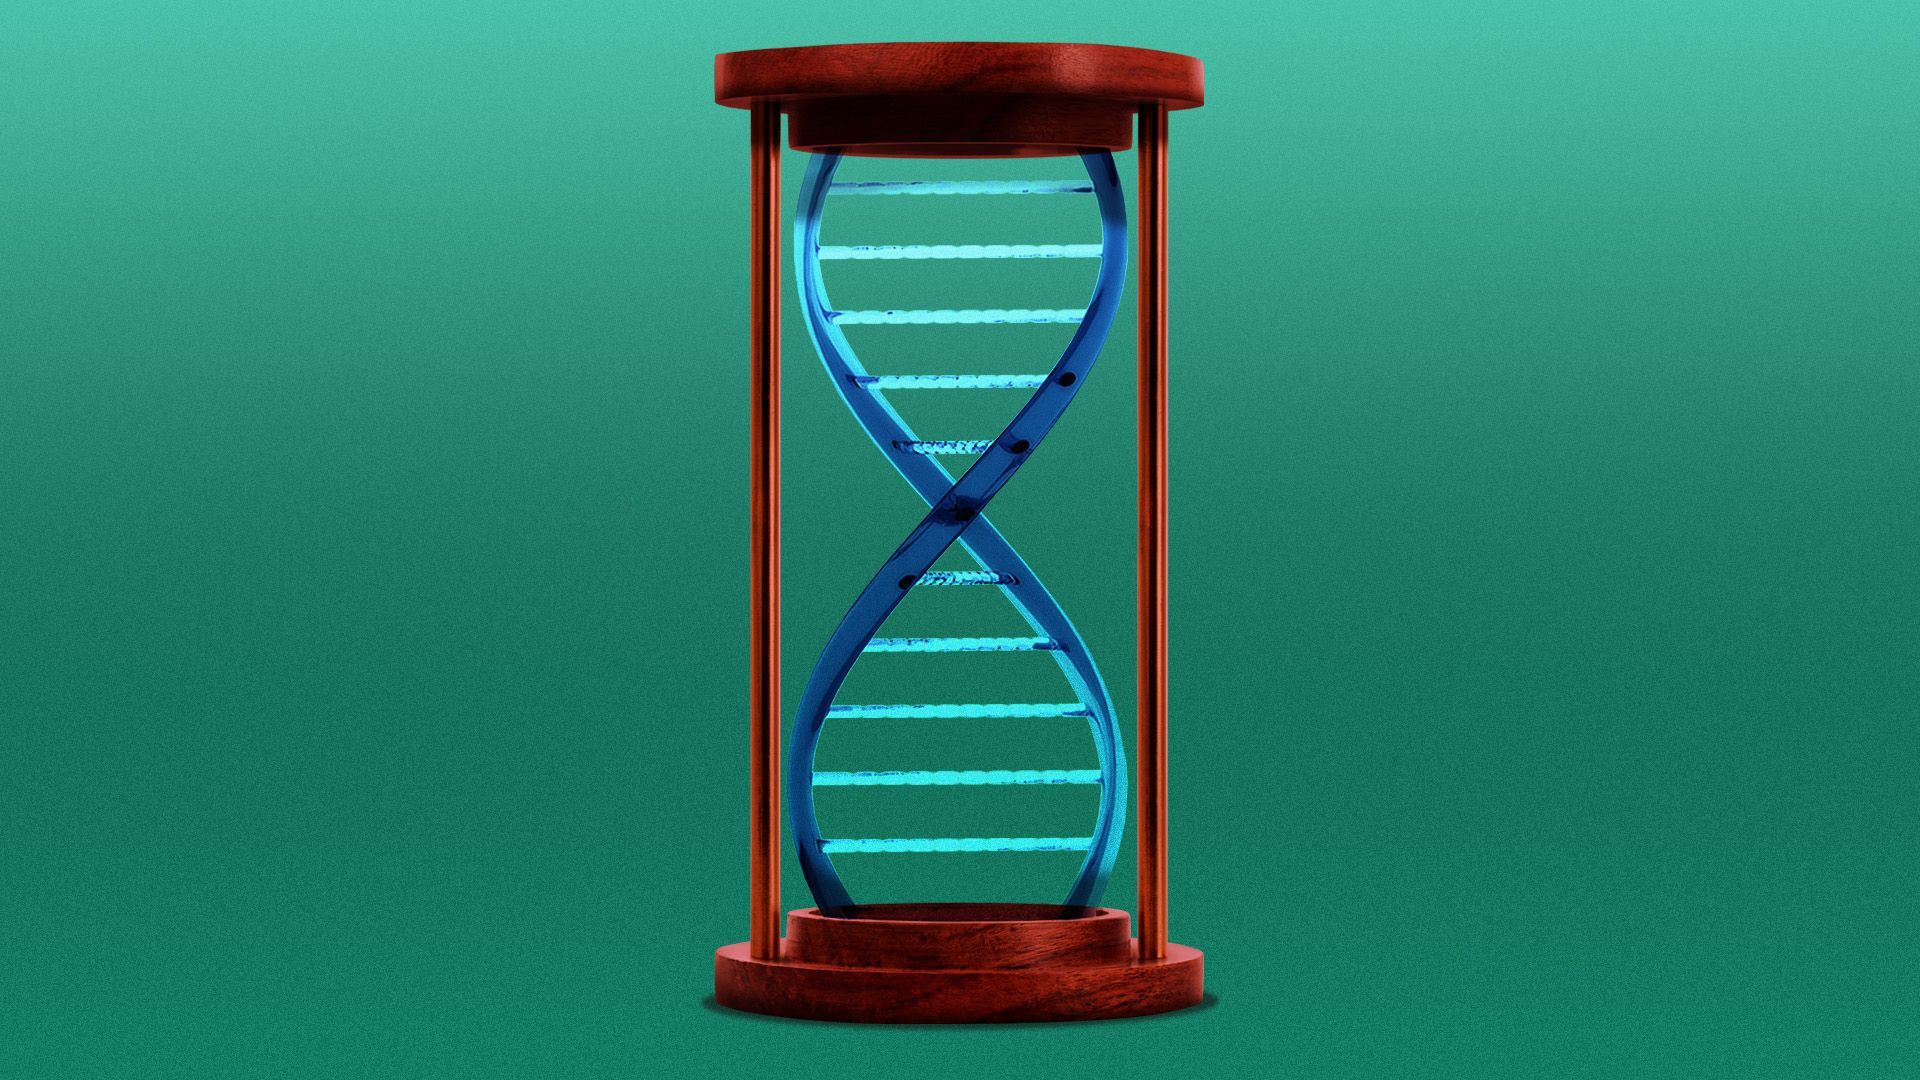 Illustration of a hourglass with a DNA strand in place of the glass